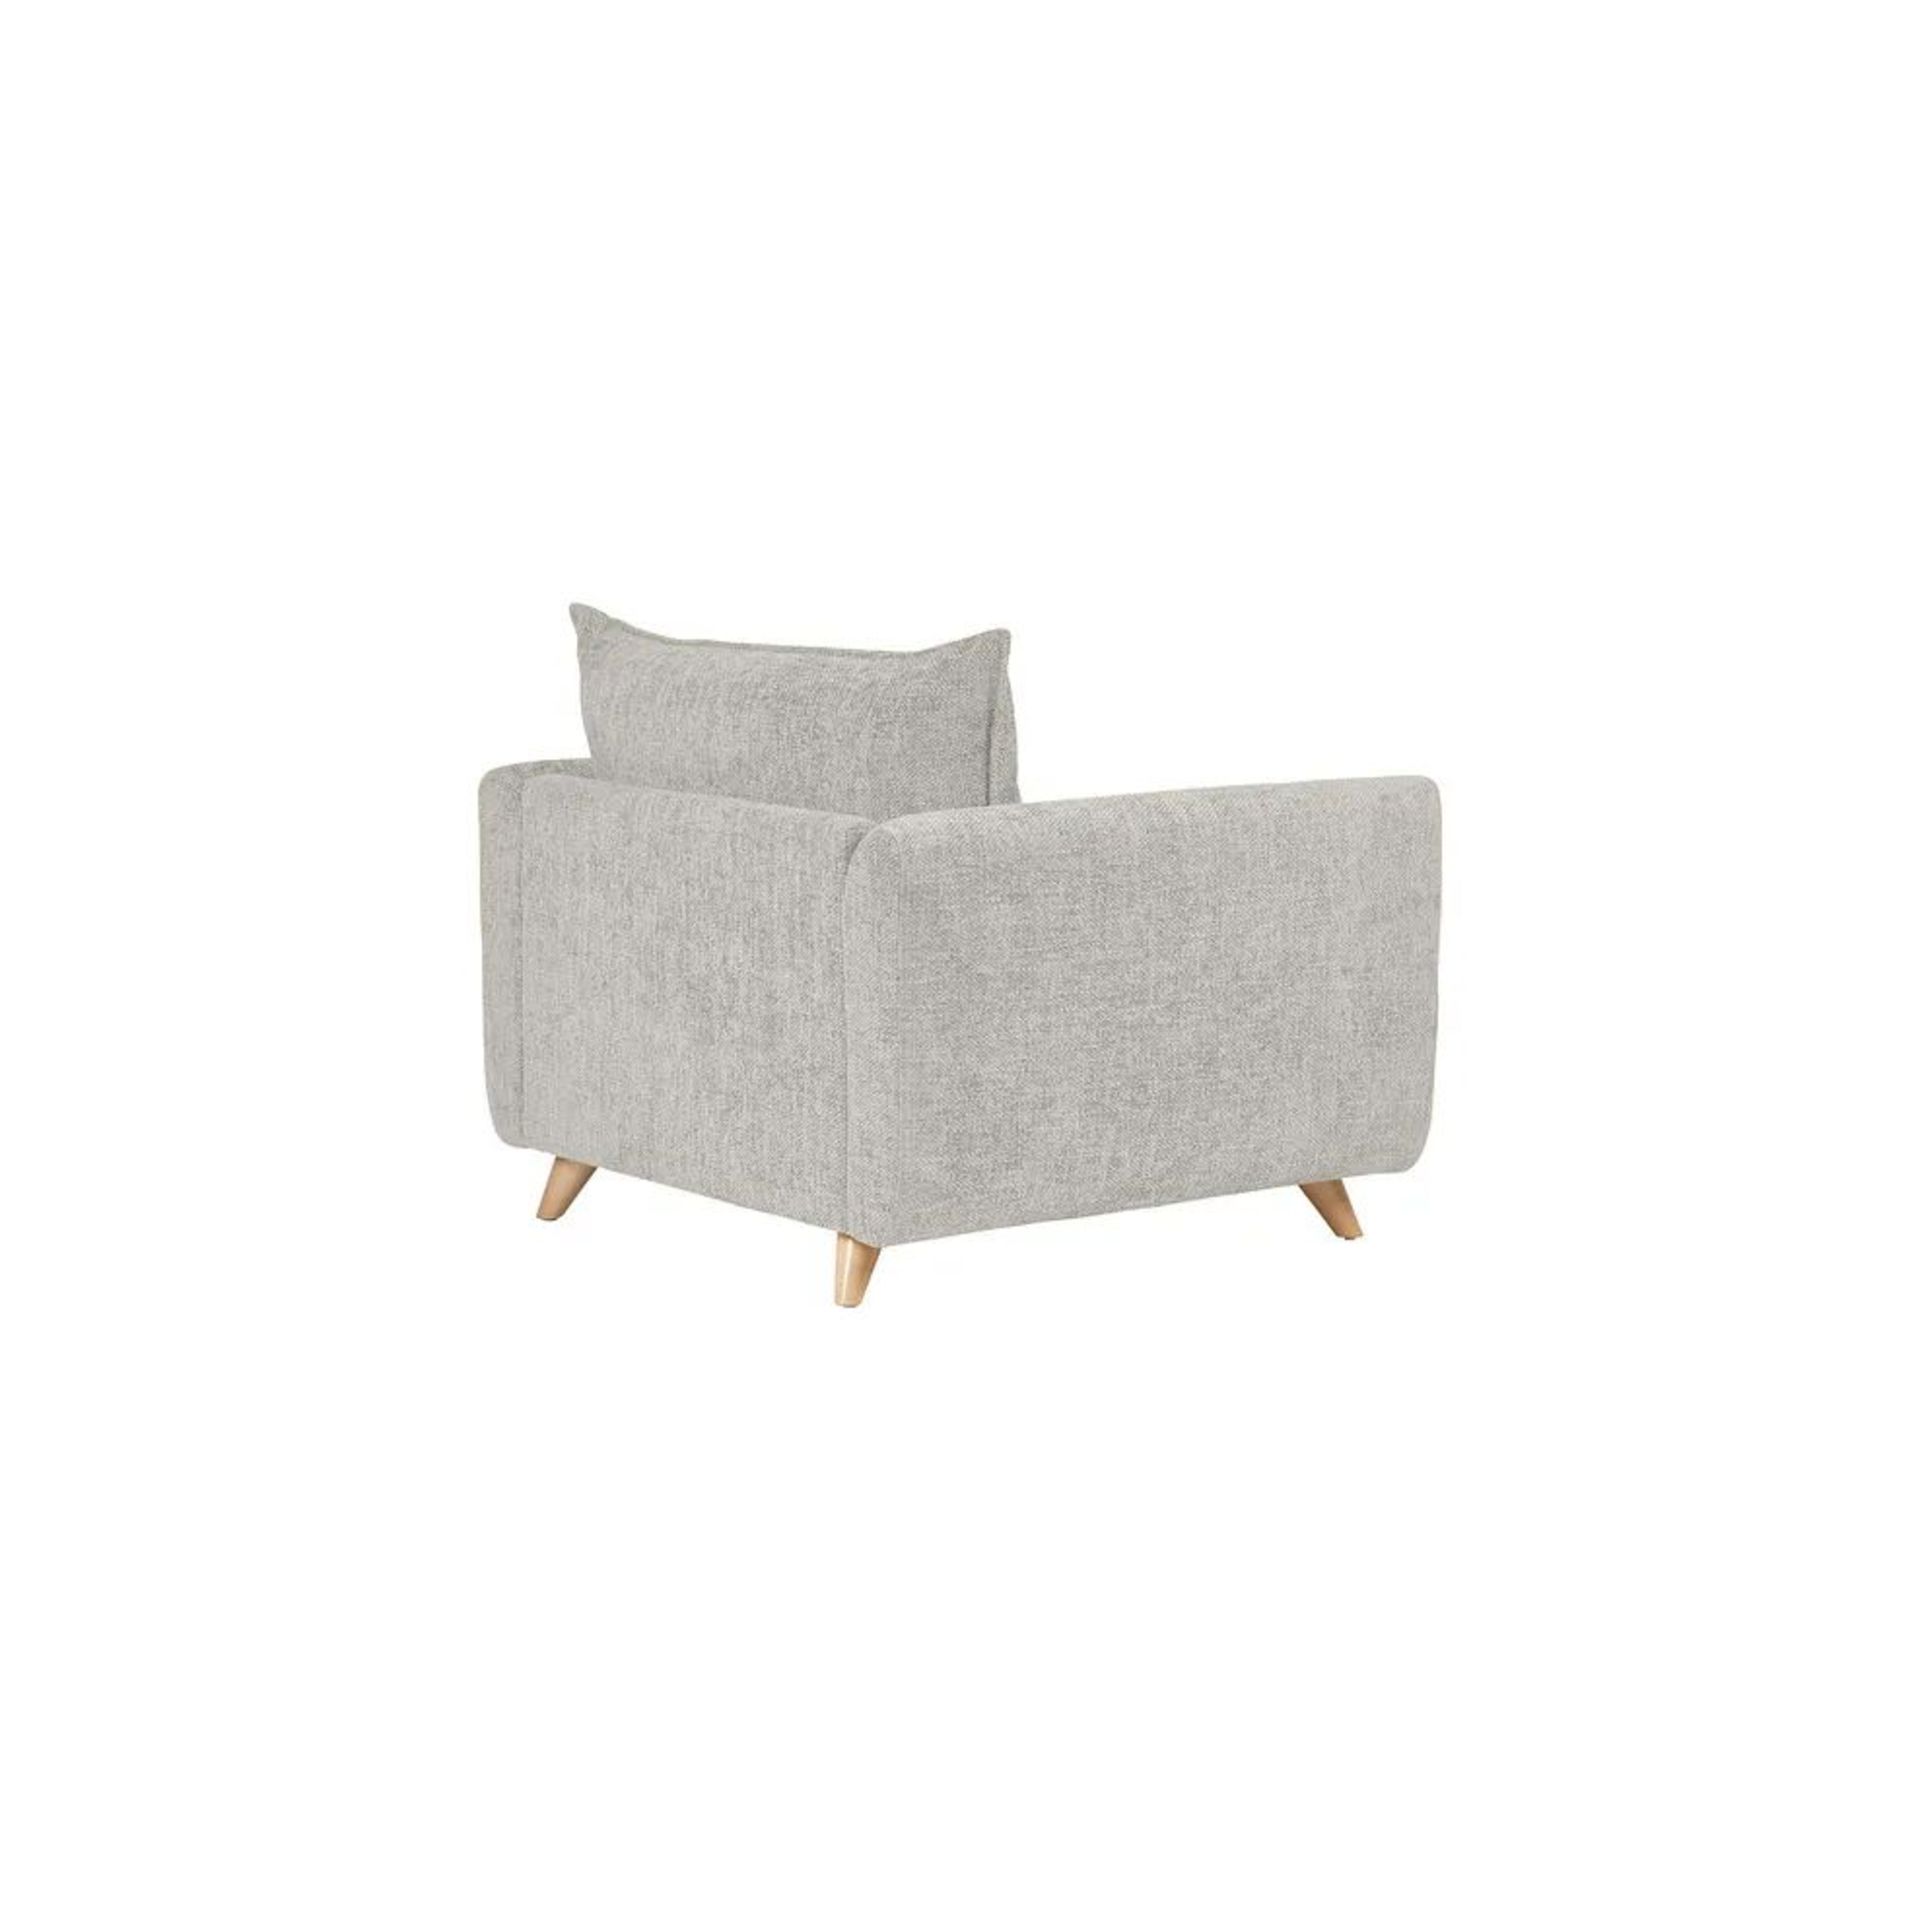 BRAND NEW DALBY High Back Loveseat - SILVER FABRIC. RRP £1149. Our Dalby loveseat, shown here in - Image 3 of 6